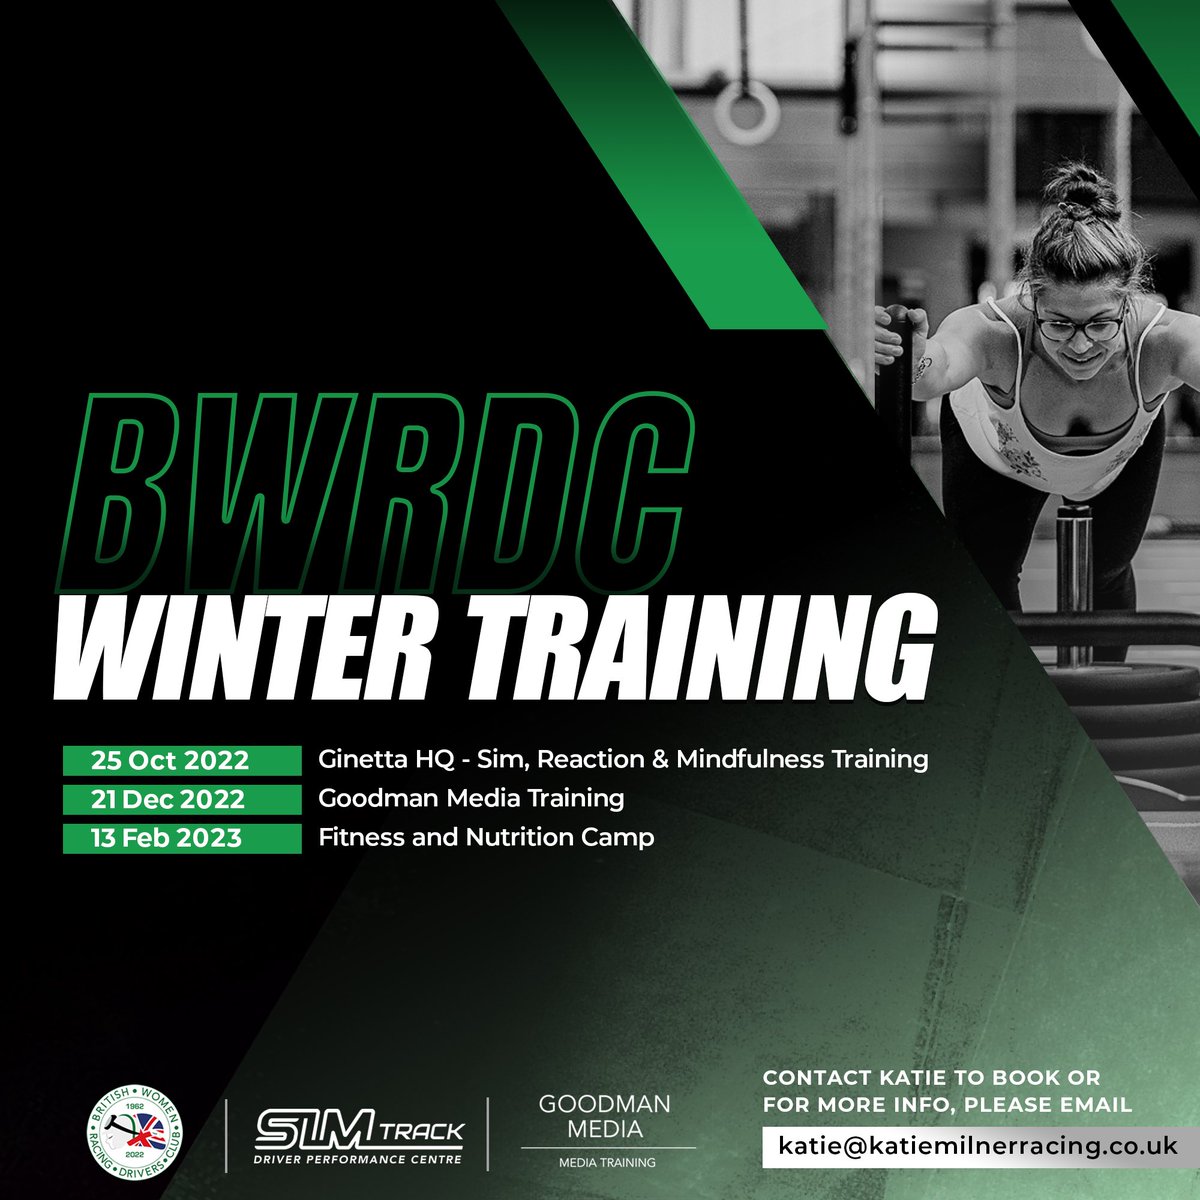 We are excited to announce our Winter Training events! Spaces are limited & open to BWRDC members only. For further information & prices contact Katie Milner: katie@katiemilnerracing.co.uk. If you’d like to join the BWRDC visit bwrdc.co.uk/join-us #bwrdc #womeninmotorsport